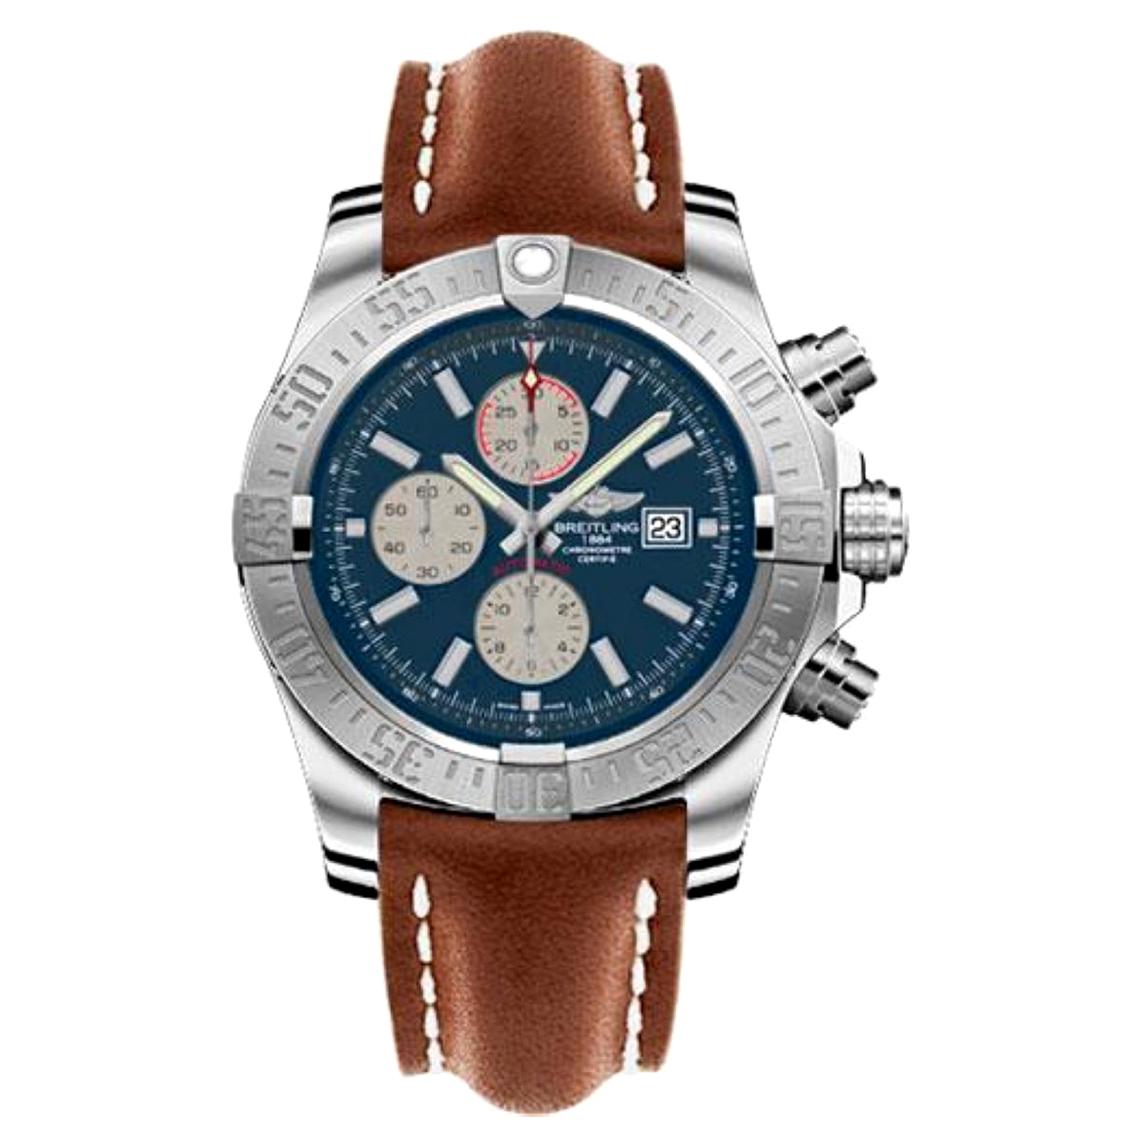 Breitling Super Avenger II Leather Strap, Tang Buckle Men's Watches For Sale